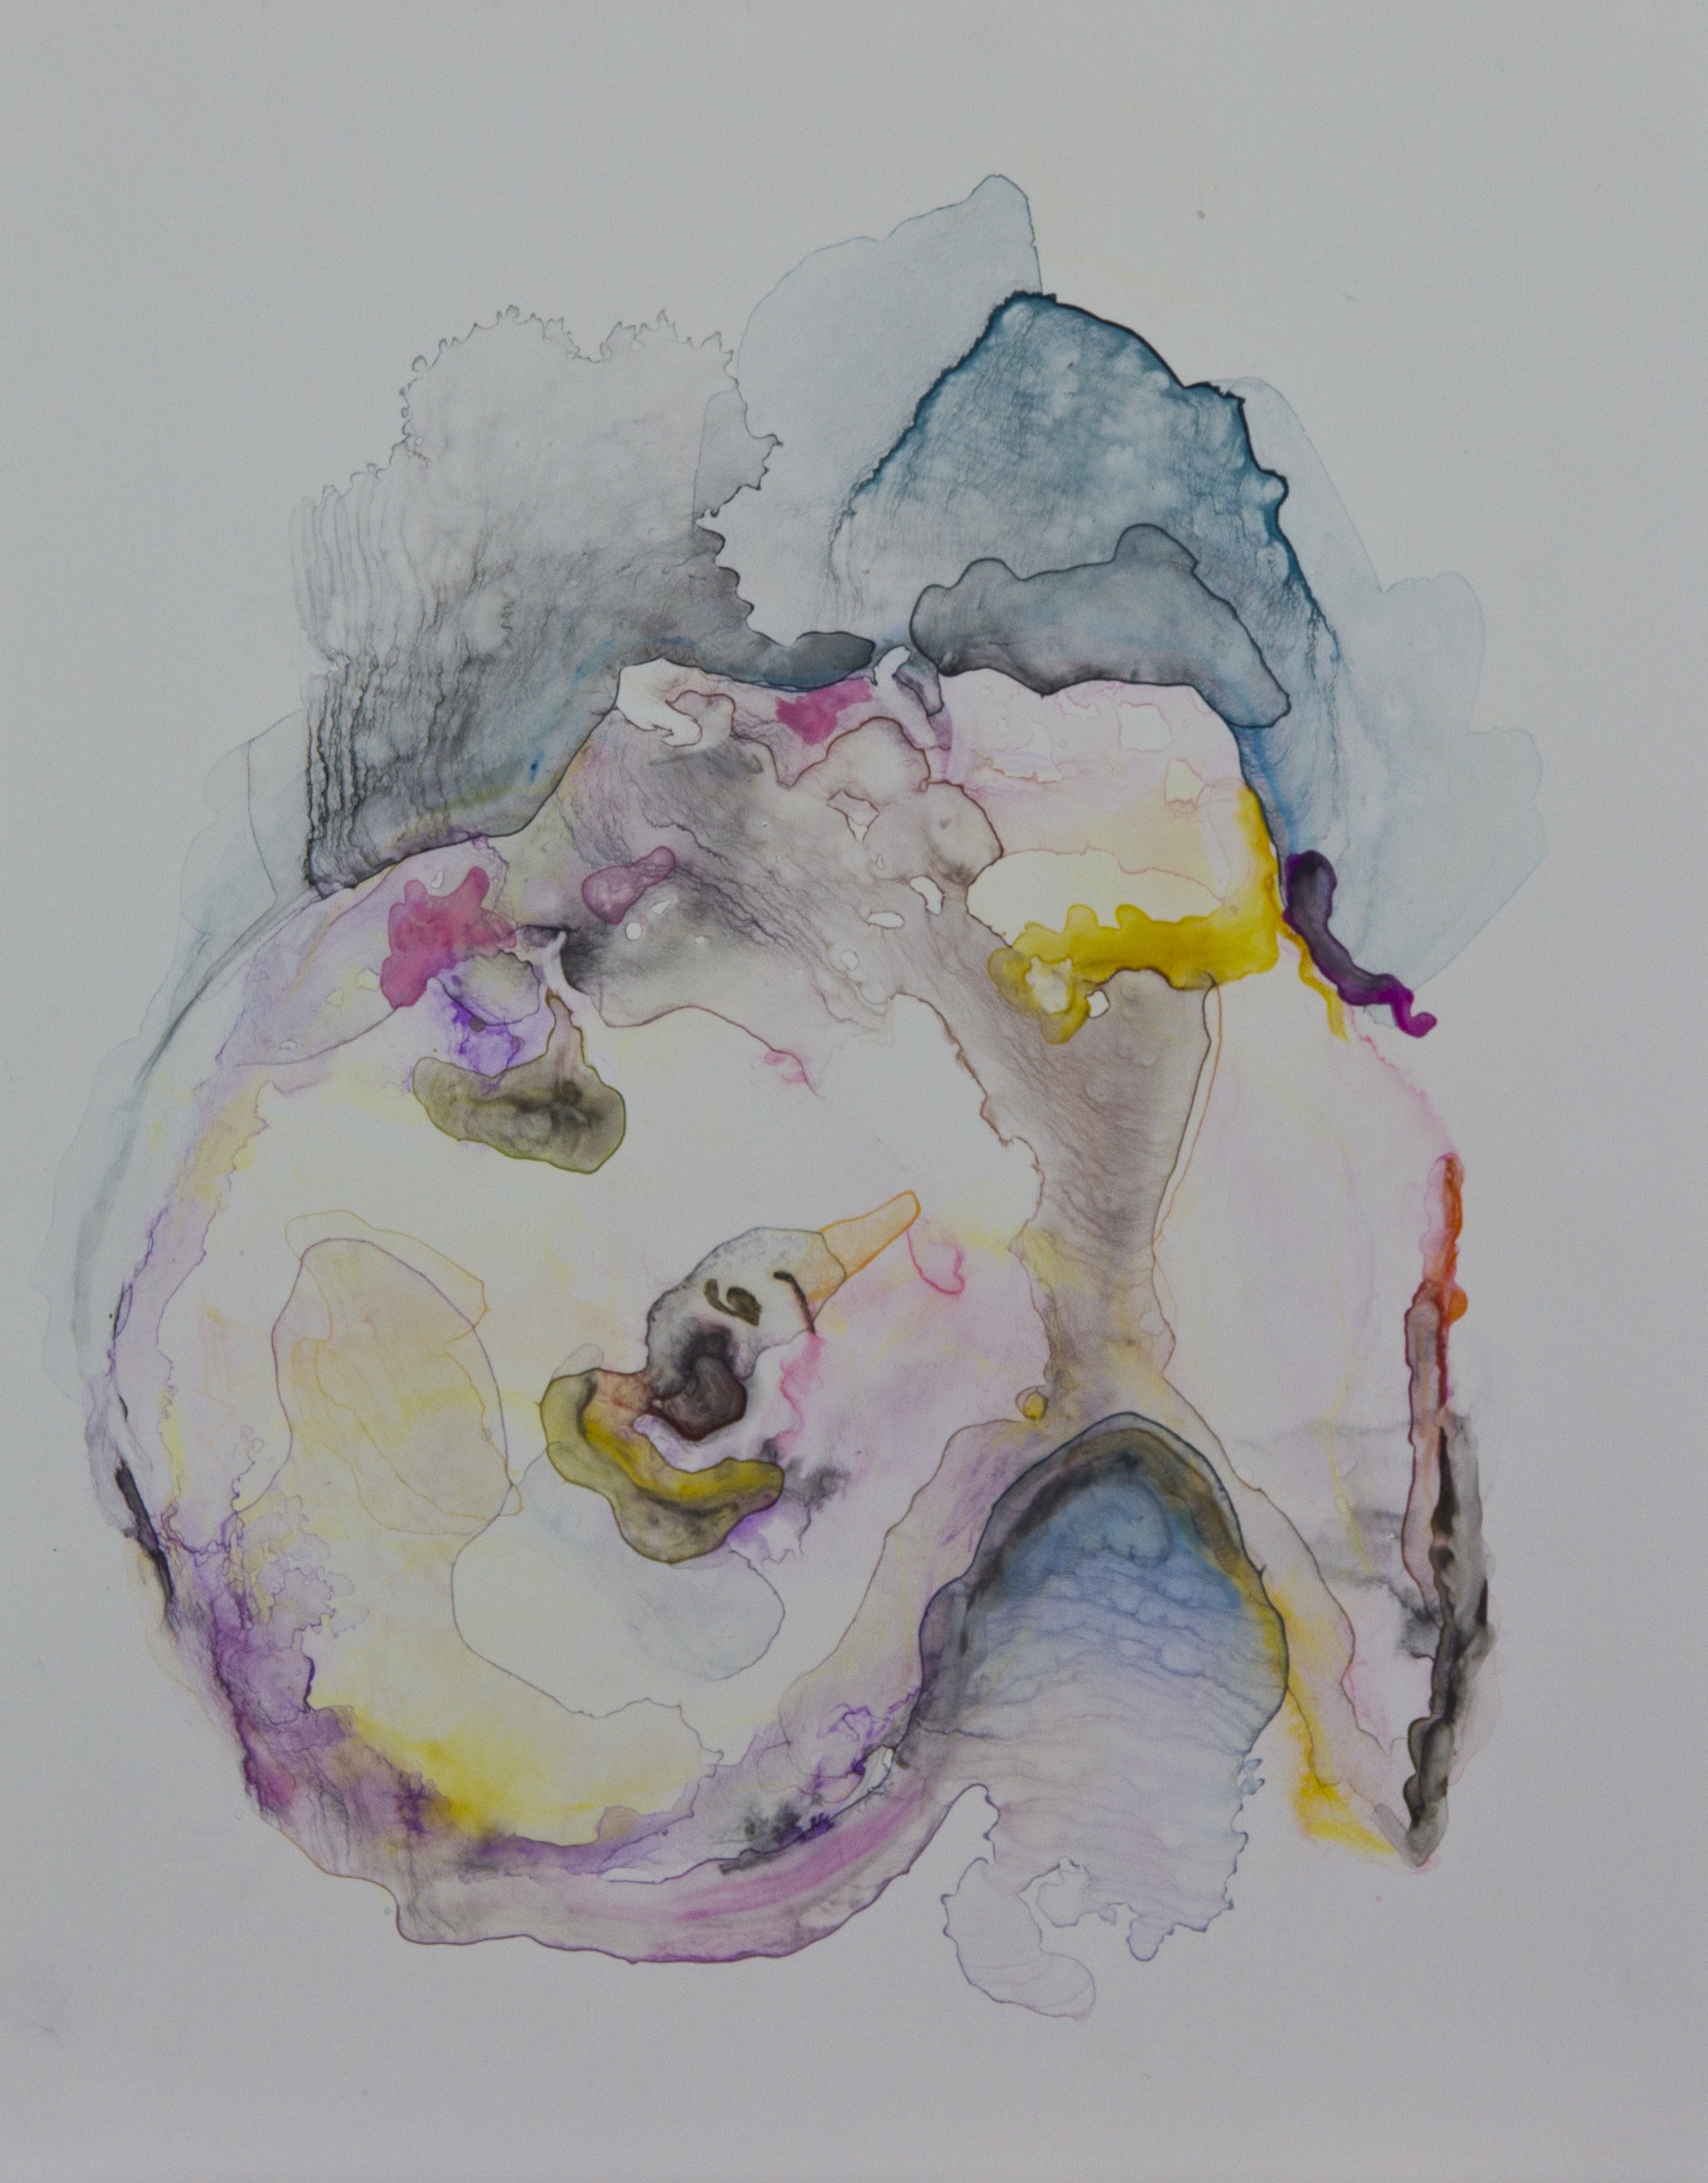 Specimen 3, 2011, watercolor on polypropylene, 11x14 inches